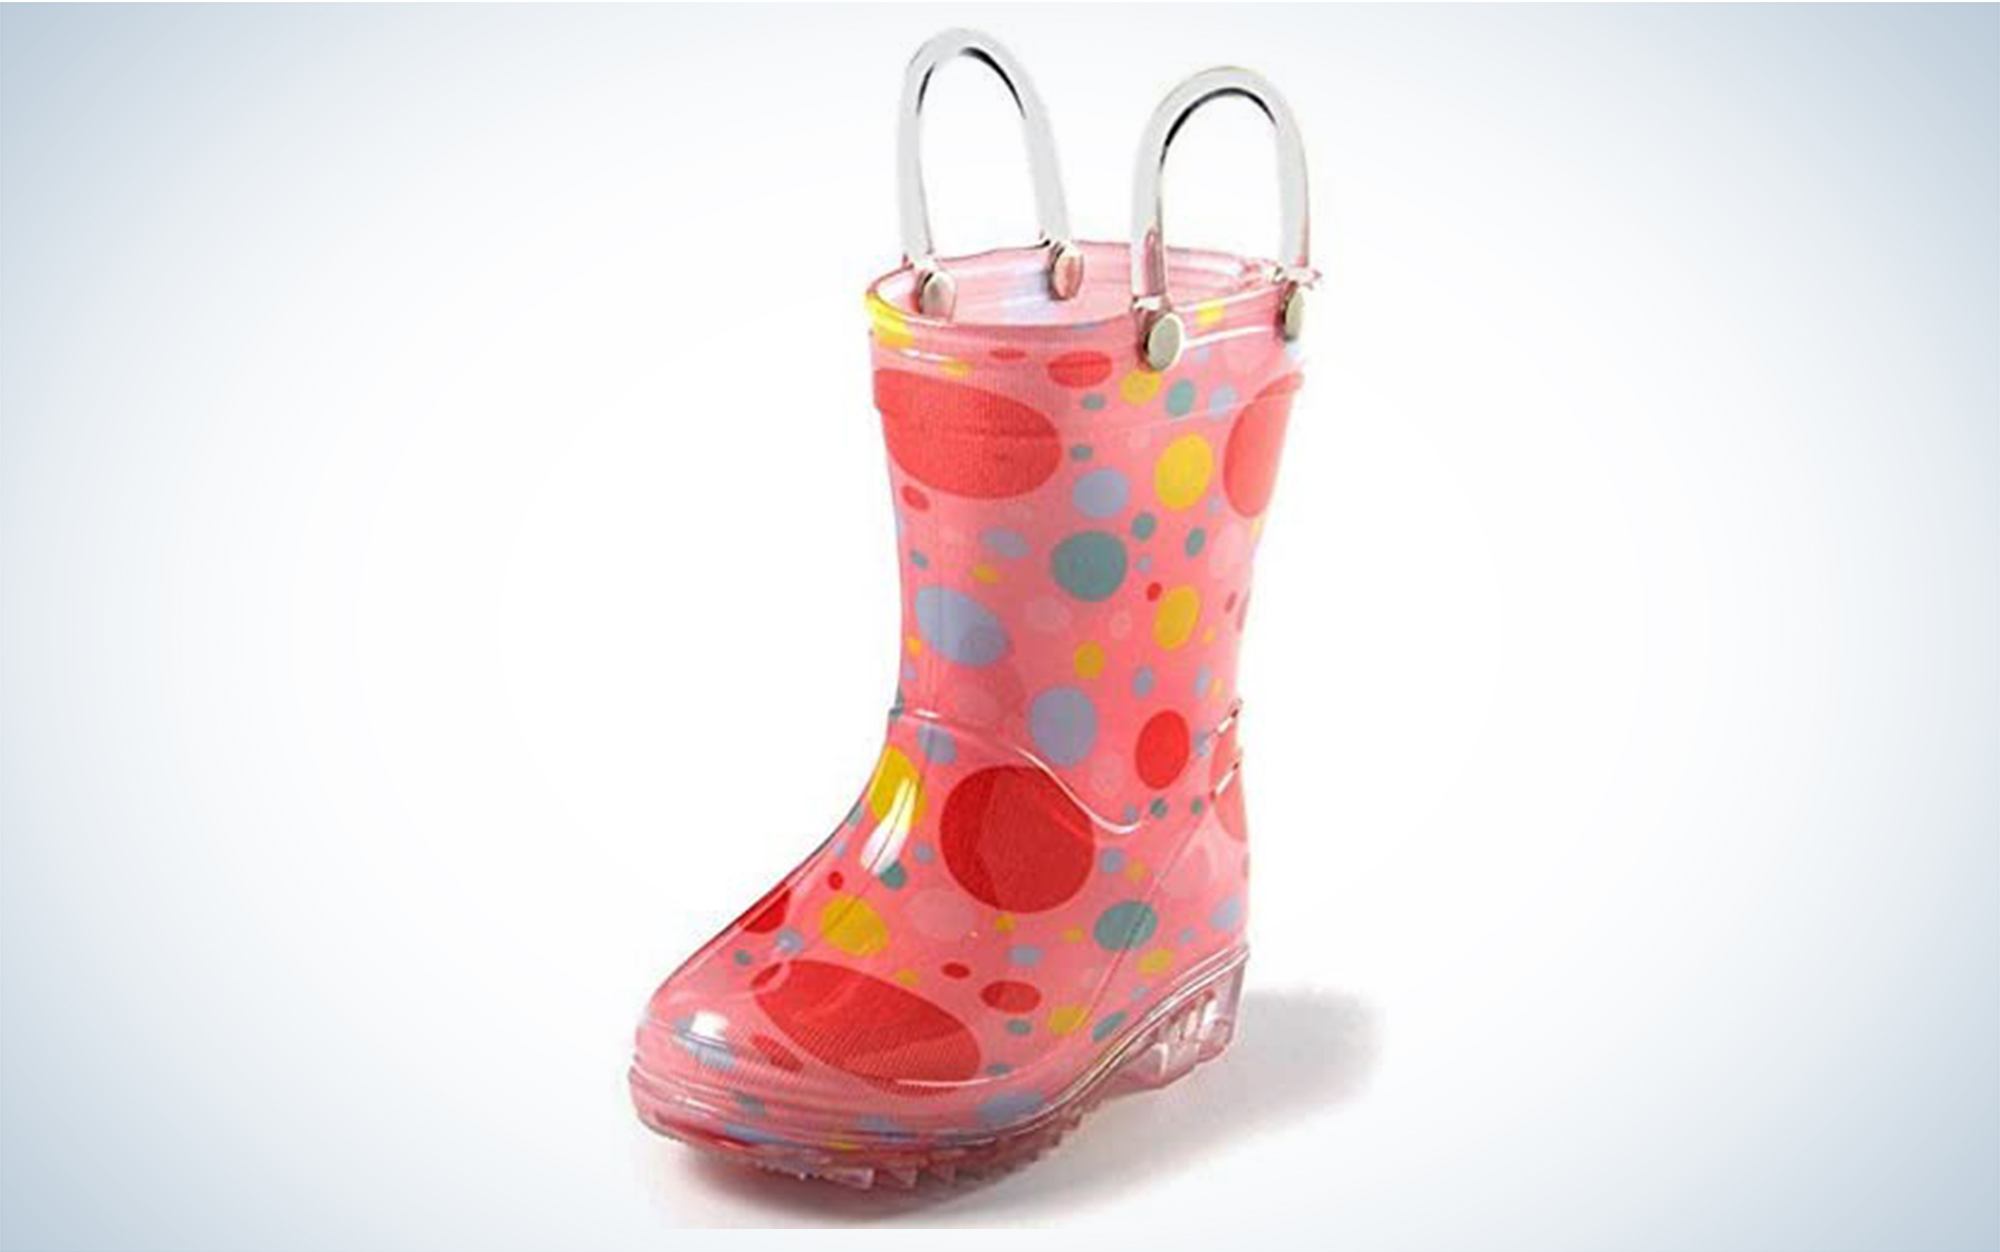 The best kids hiking shoe is whatever makes them happy, even a polka-dot rain boot.